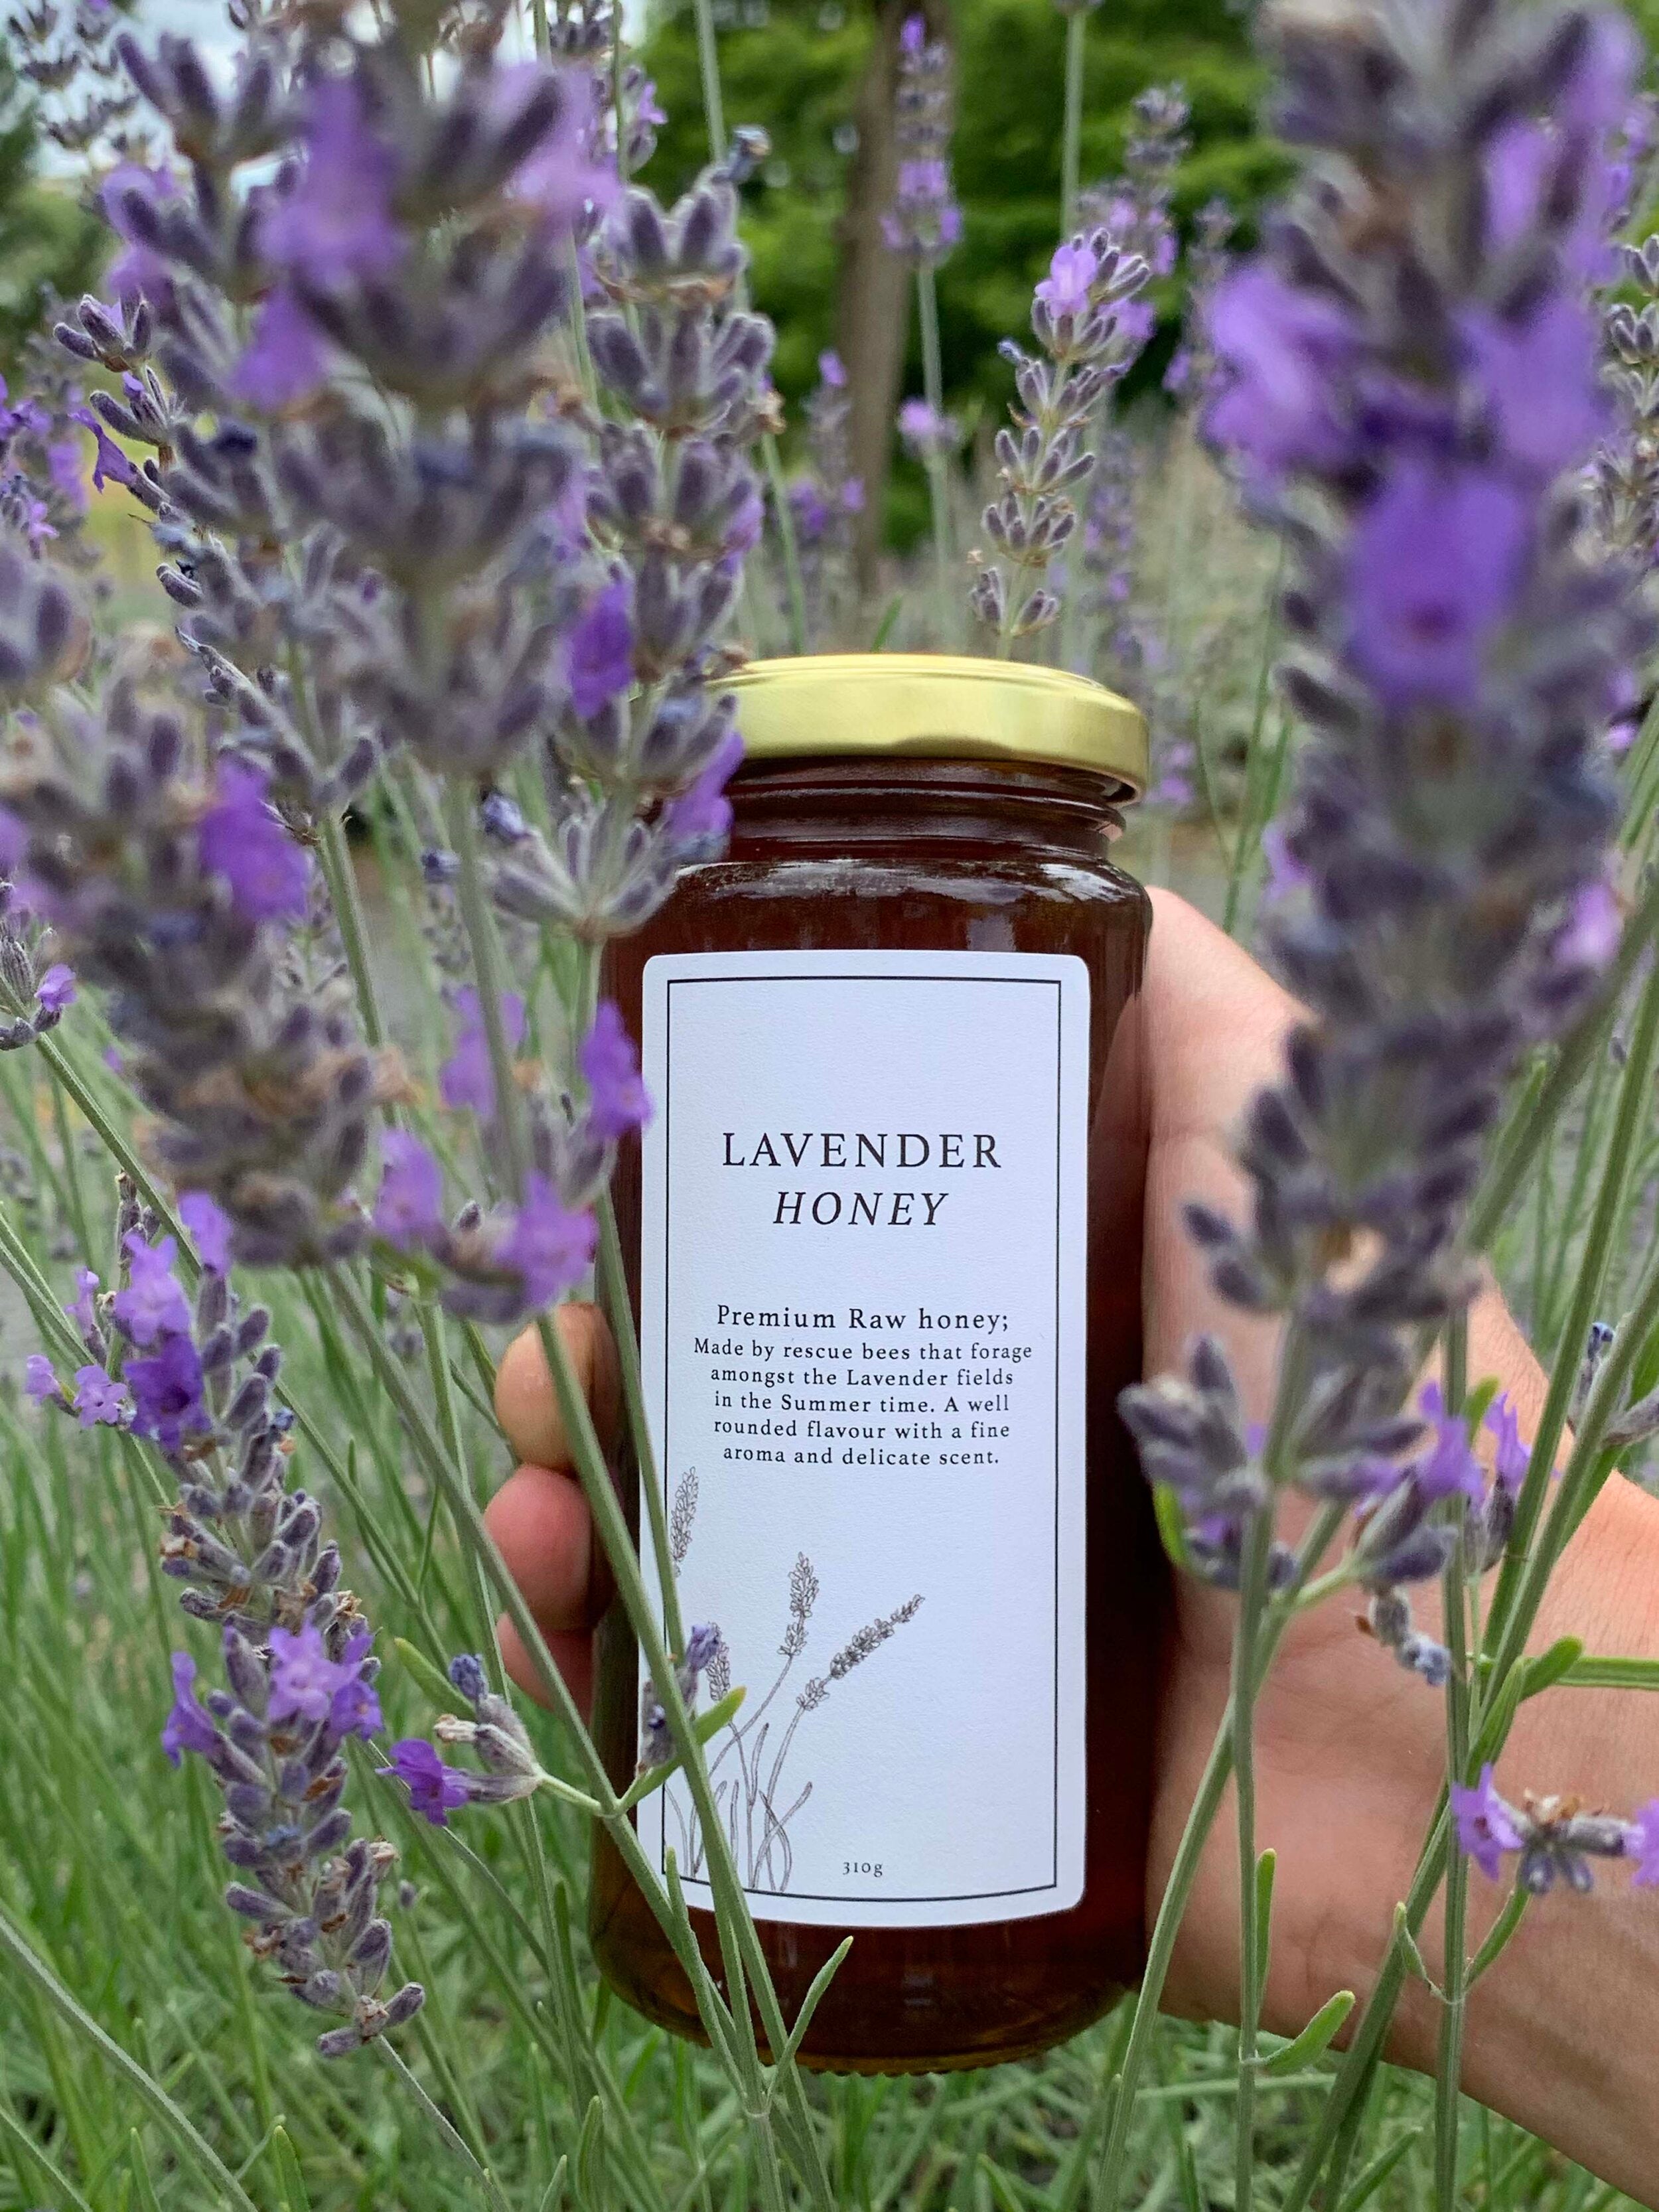 A jar of lavender honey by Bees Up Top is held amidst blooming lavender plants in Riverhead, Auckland, showcasing the source of its raw natural flavor.